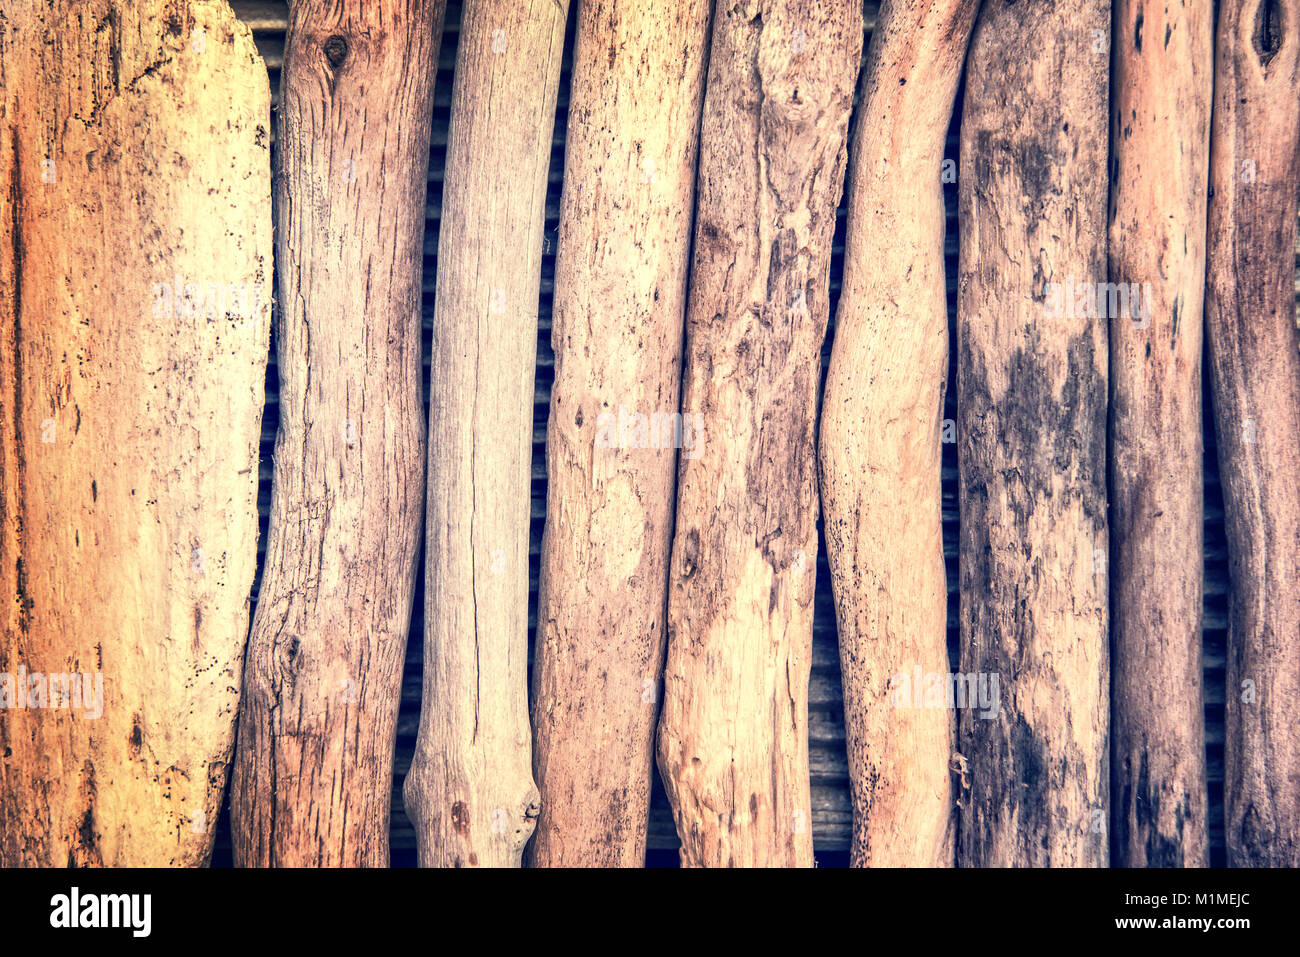 Old wood branches background, vintage process Stock Photo